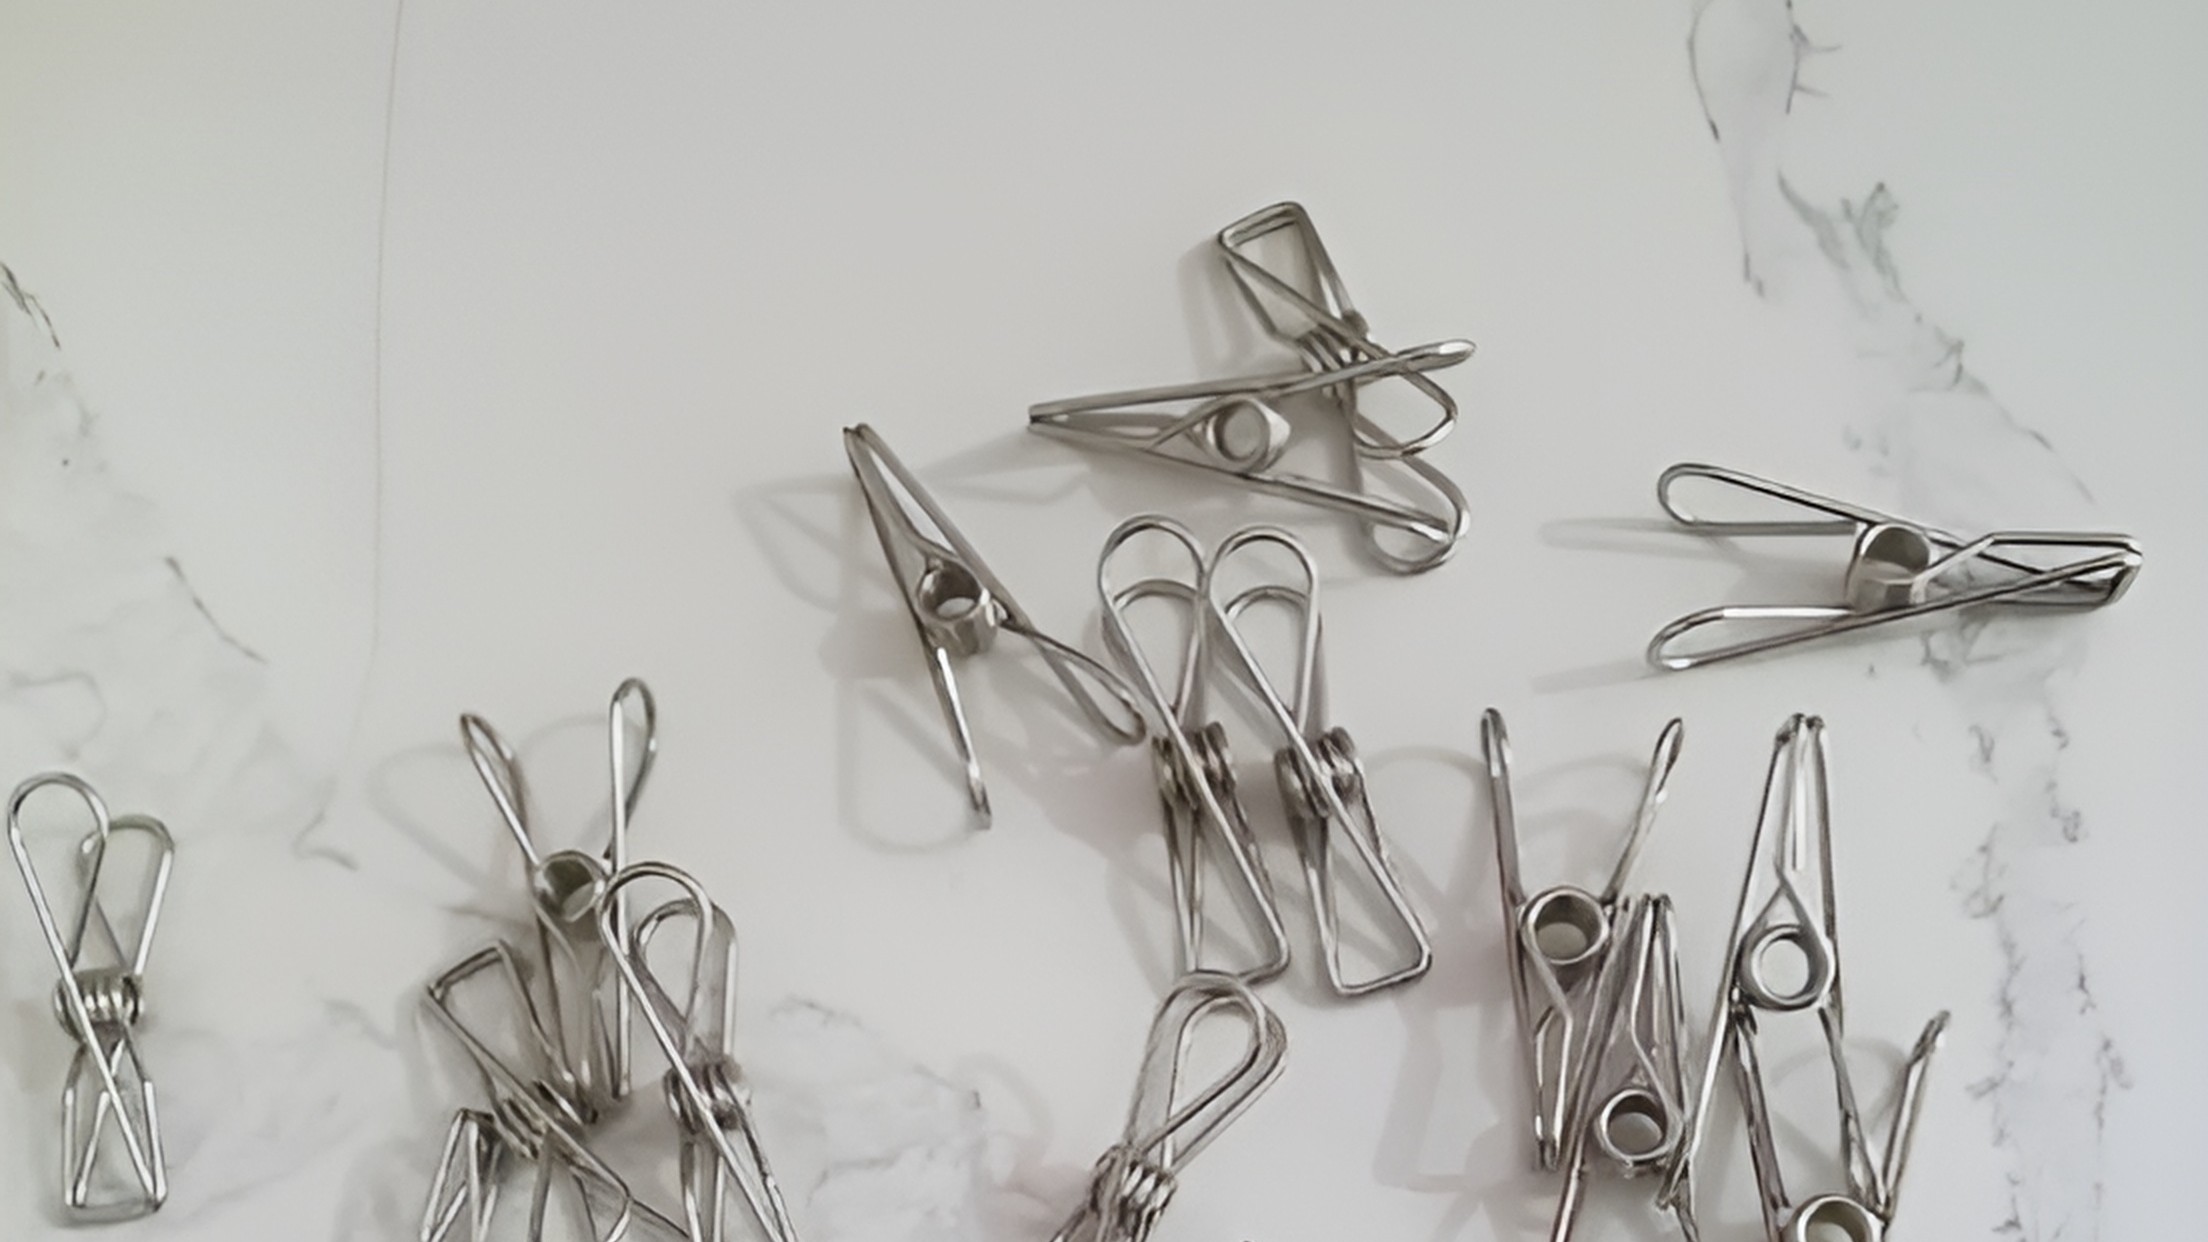 Stainless Steel Clothes Pegs From Laundry to Landfill: The Lifecycle of a Steel Peg